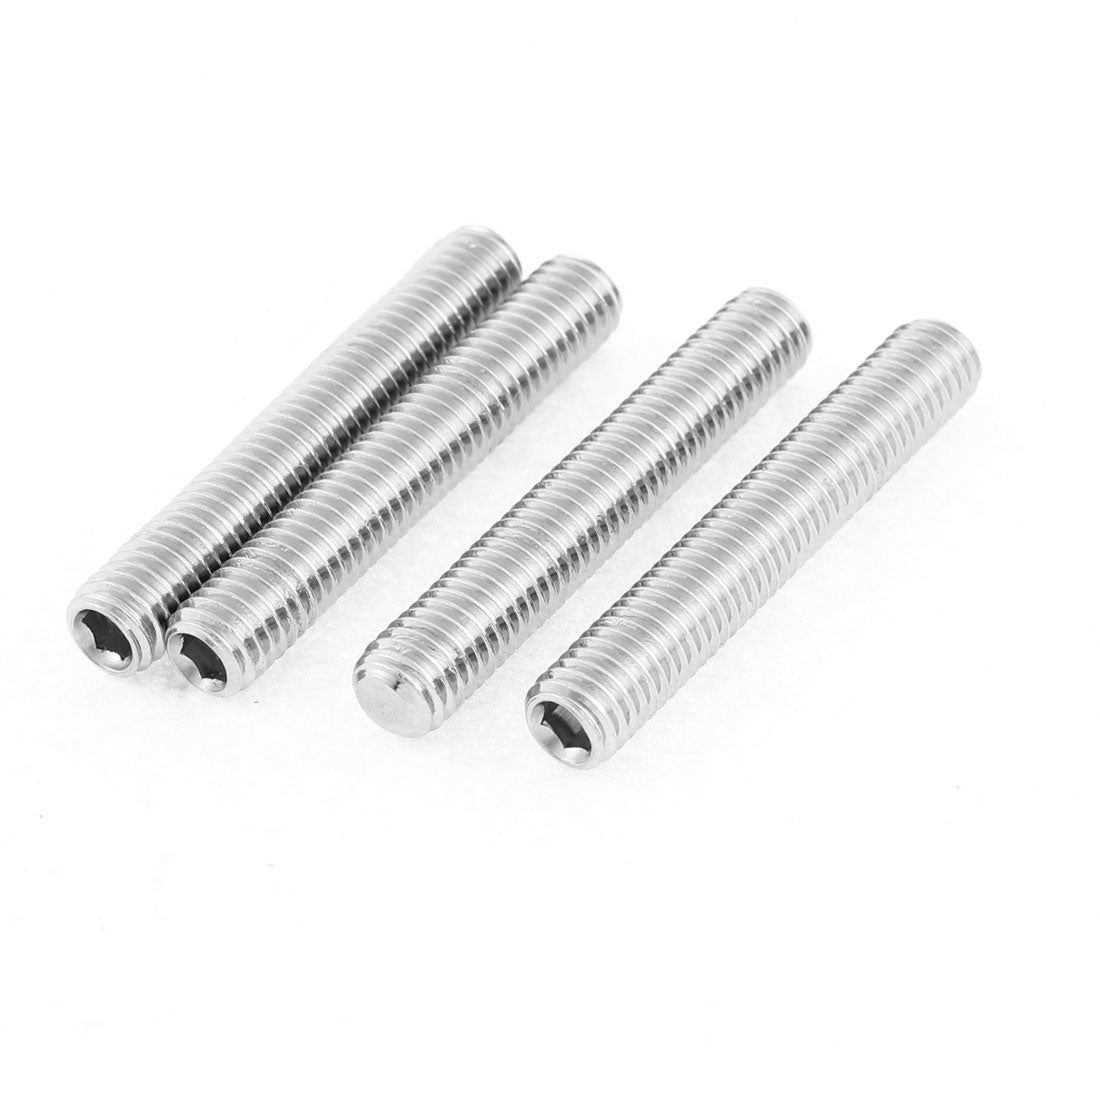 uxcell Uxcell M8x50mm 1.25mm Pitch Stainless Steel Hex Socket Set Flat Point Grub Screws 4pcs